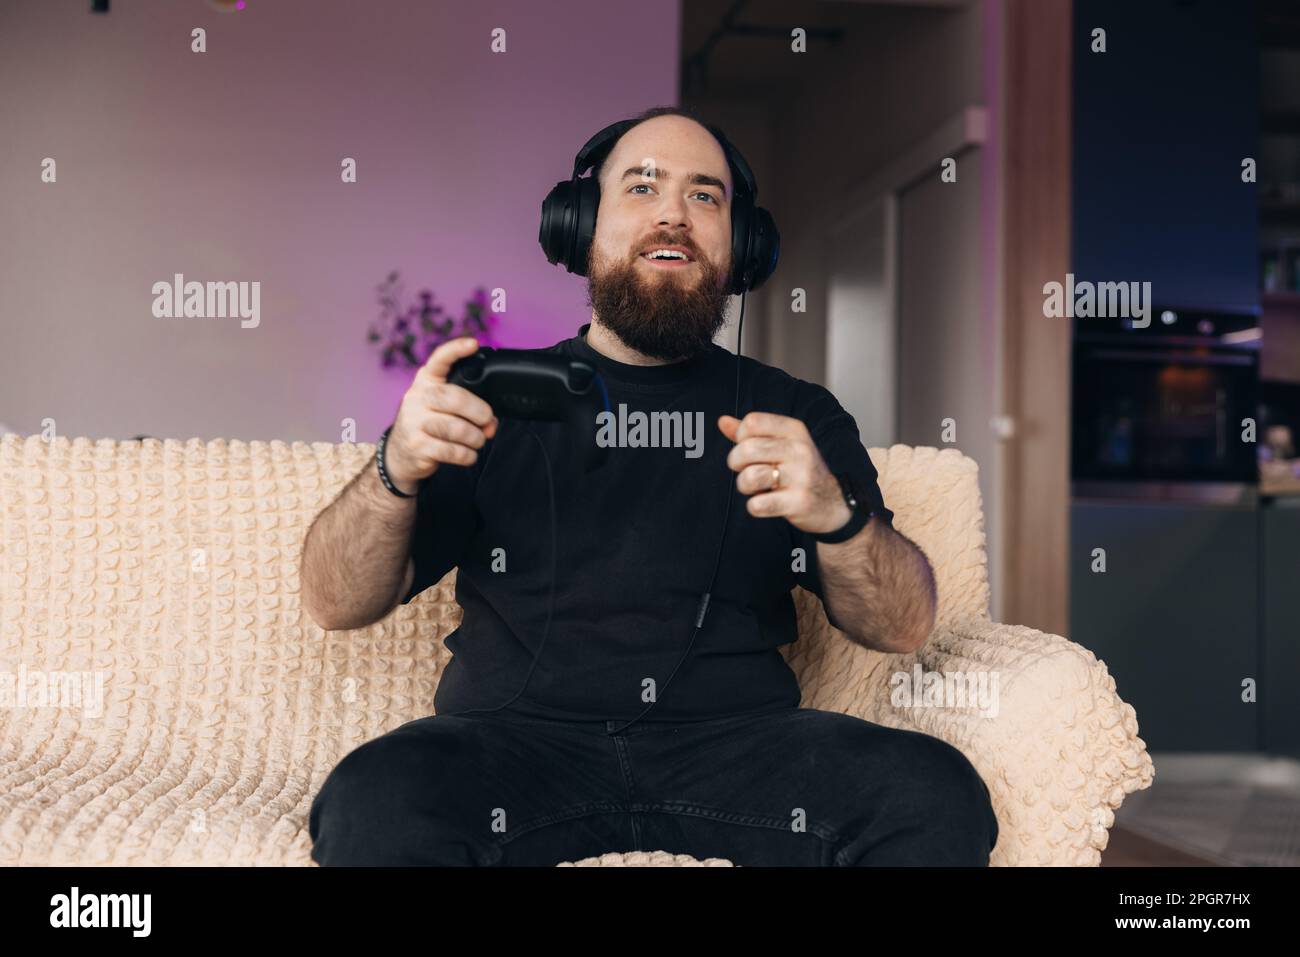 Male gamer playing video games with the controller in his hands and his headsets on. Face expression of a gamer. Stock Photo